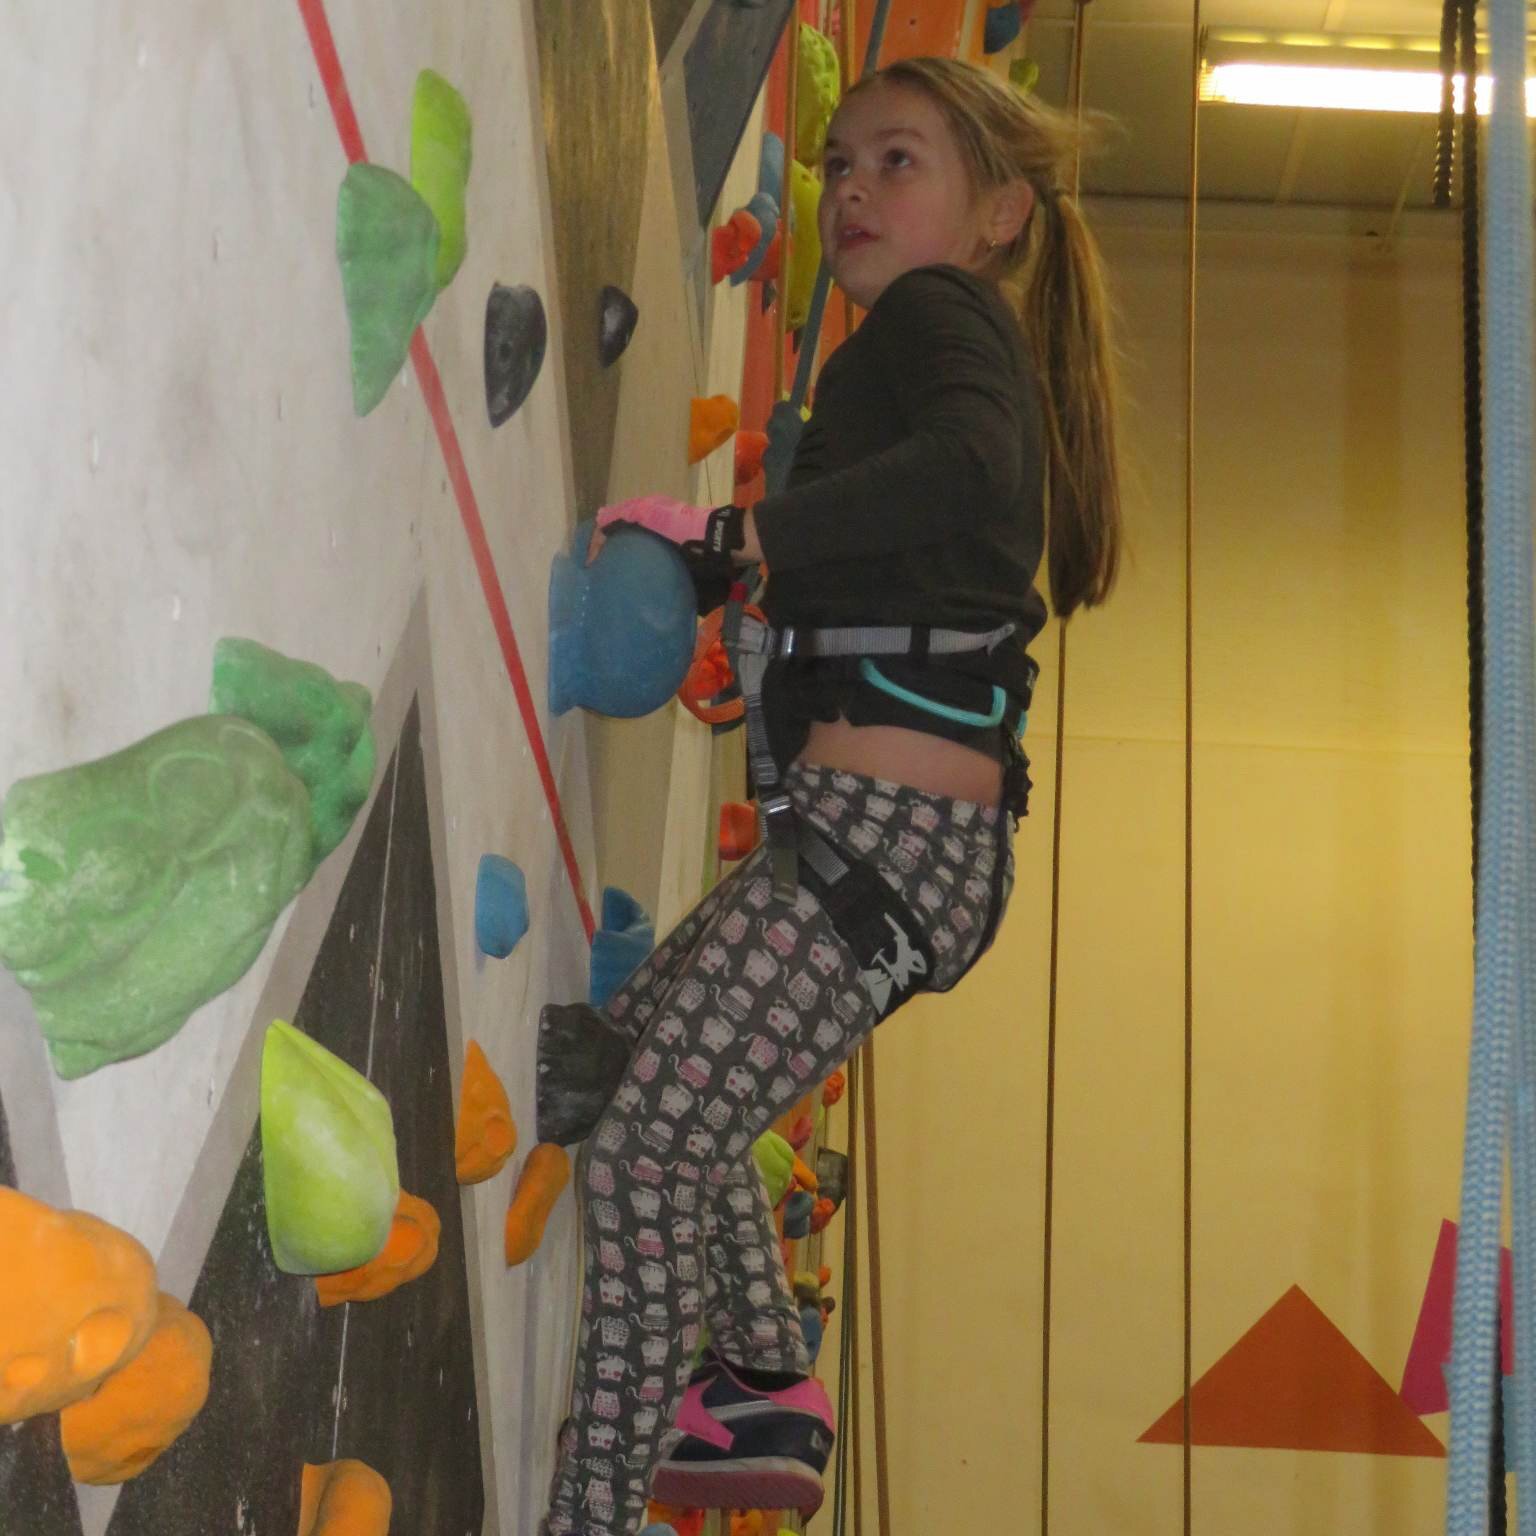 Eyes on the prize. New challenges coming soon at our Cwmafan climbing wall 😁🧗 #climbing #Community #nofear #notforprofit